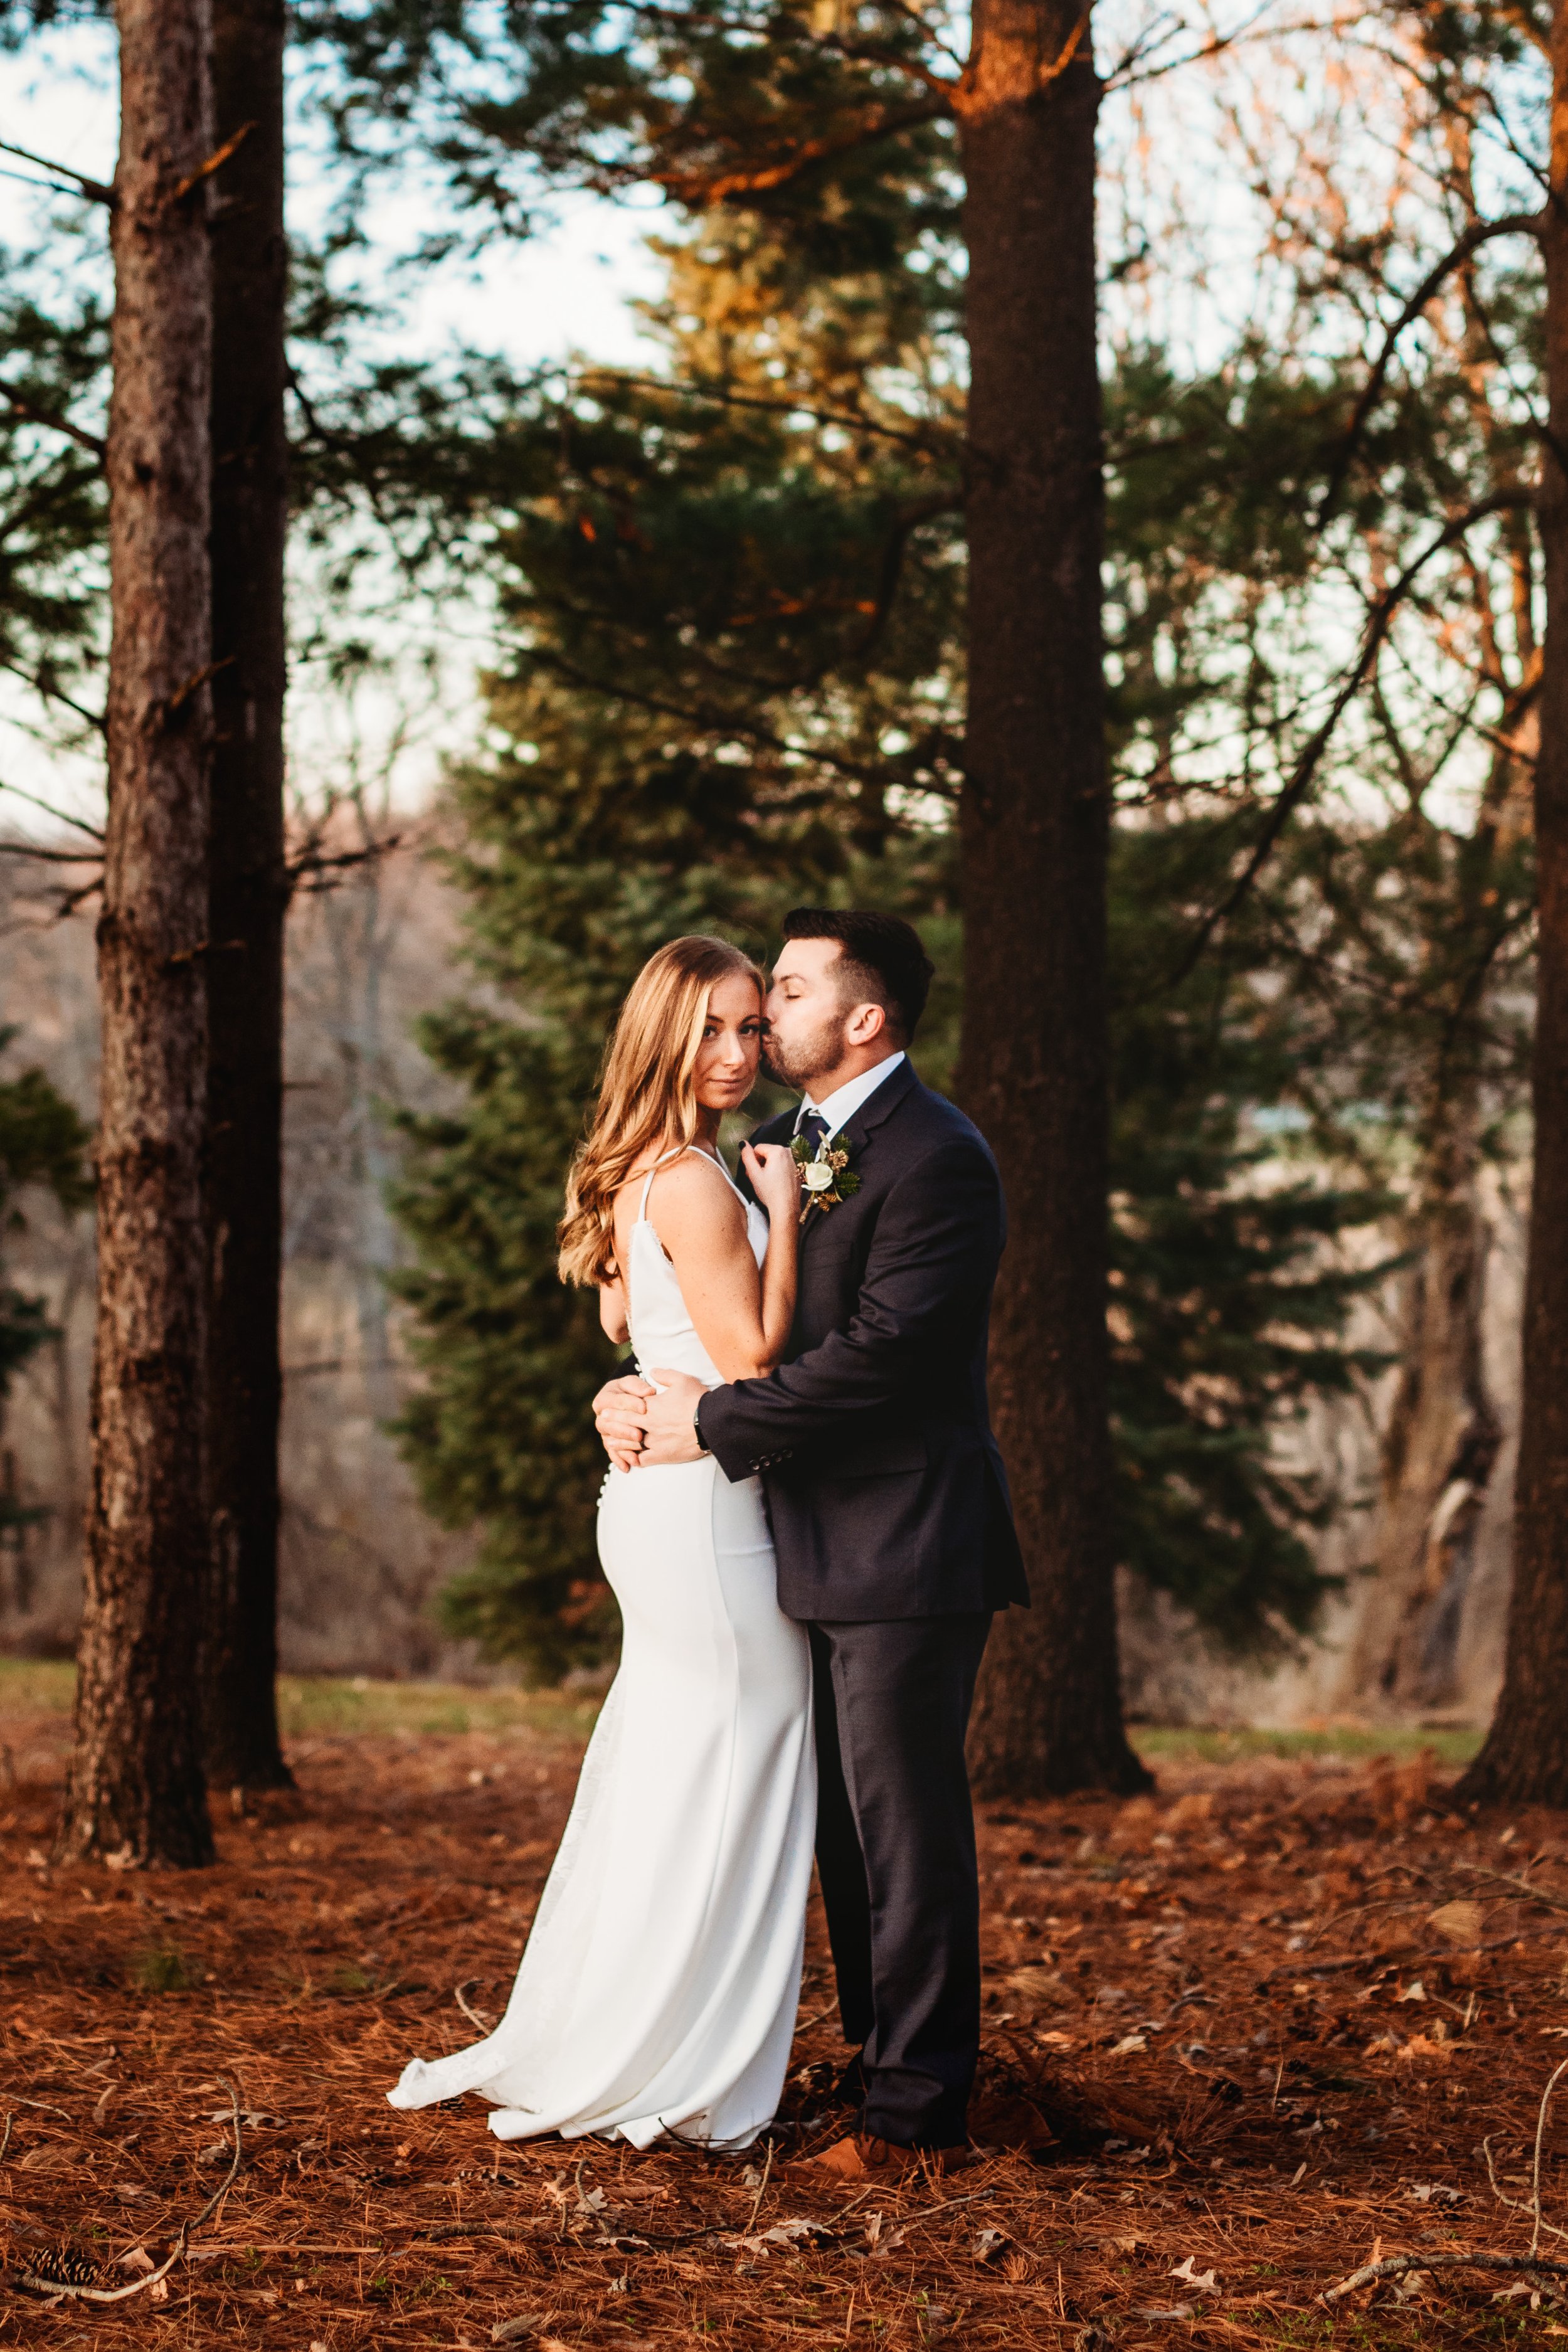  At the Ironwood on the Vermillion a bride and groom embrace on their wedding day at dusk by Teala Ward Photography. dusk wedding photo forest #tealawardphotography #tealawardweddings #LaSalleIllinois #IronwoodontheVermillion #weddingphotographyIL 